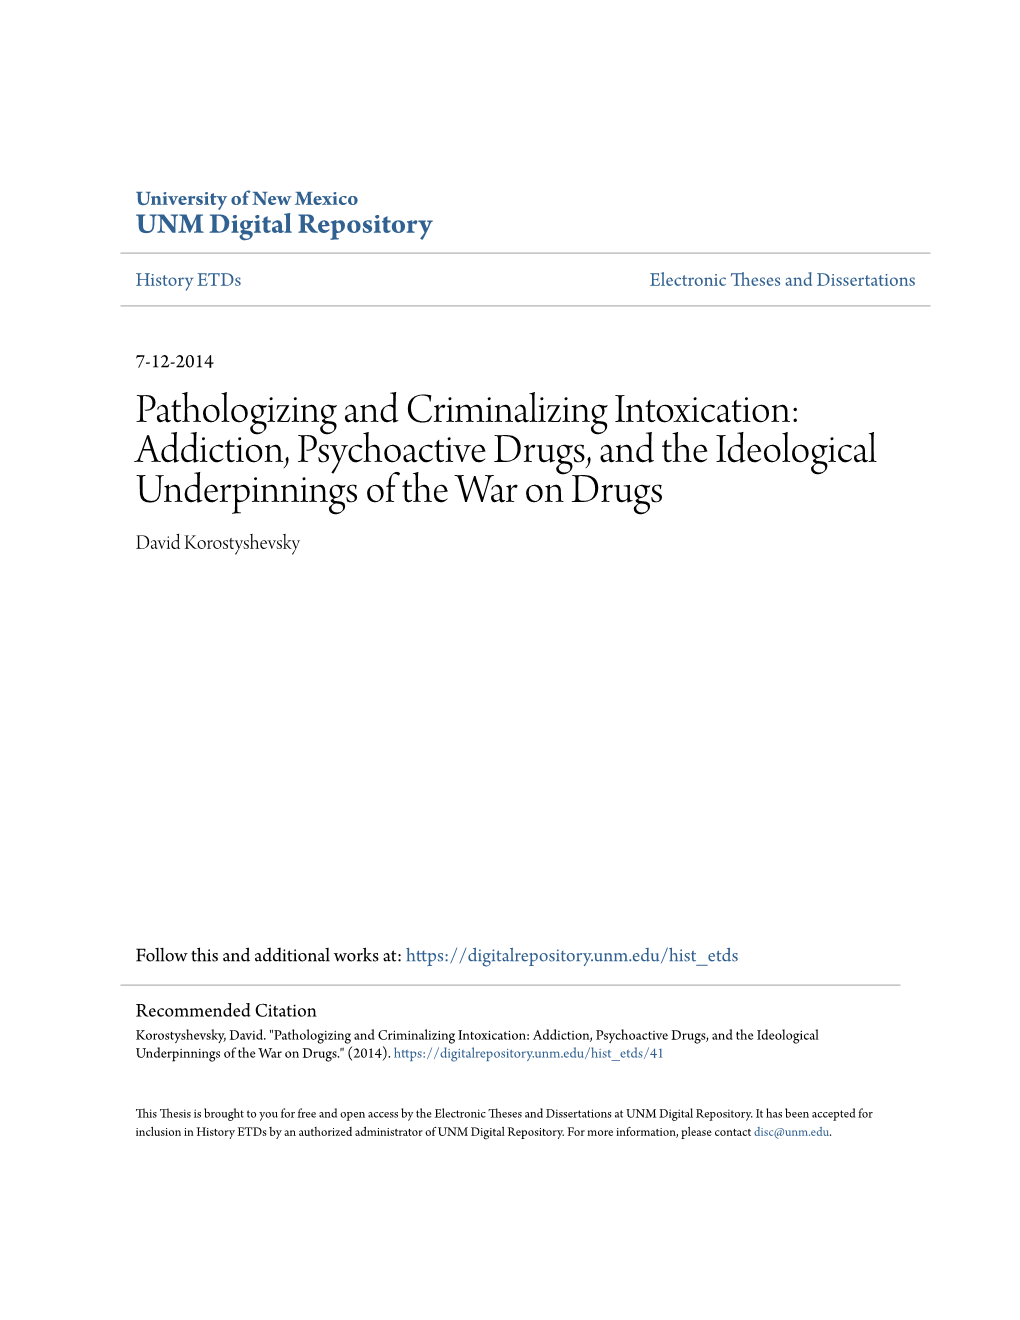 Addiction, Psychoactive Drugs, and the Ideological Underpinnings of the War on Drugs David Korostyshevsky